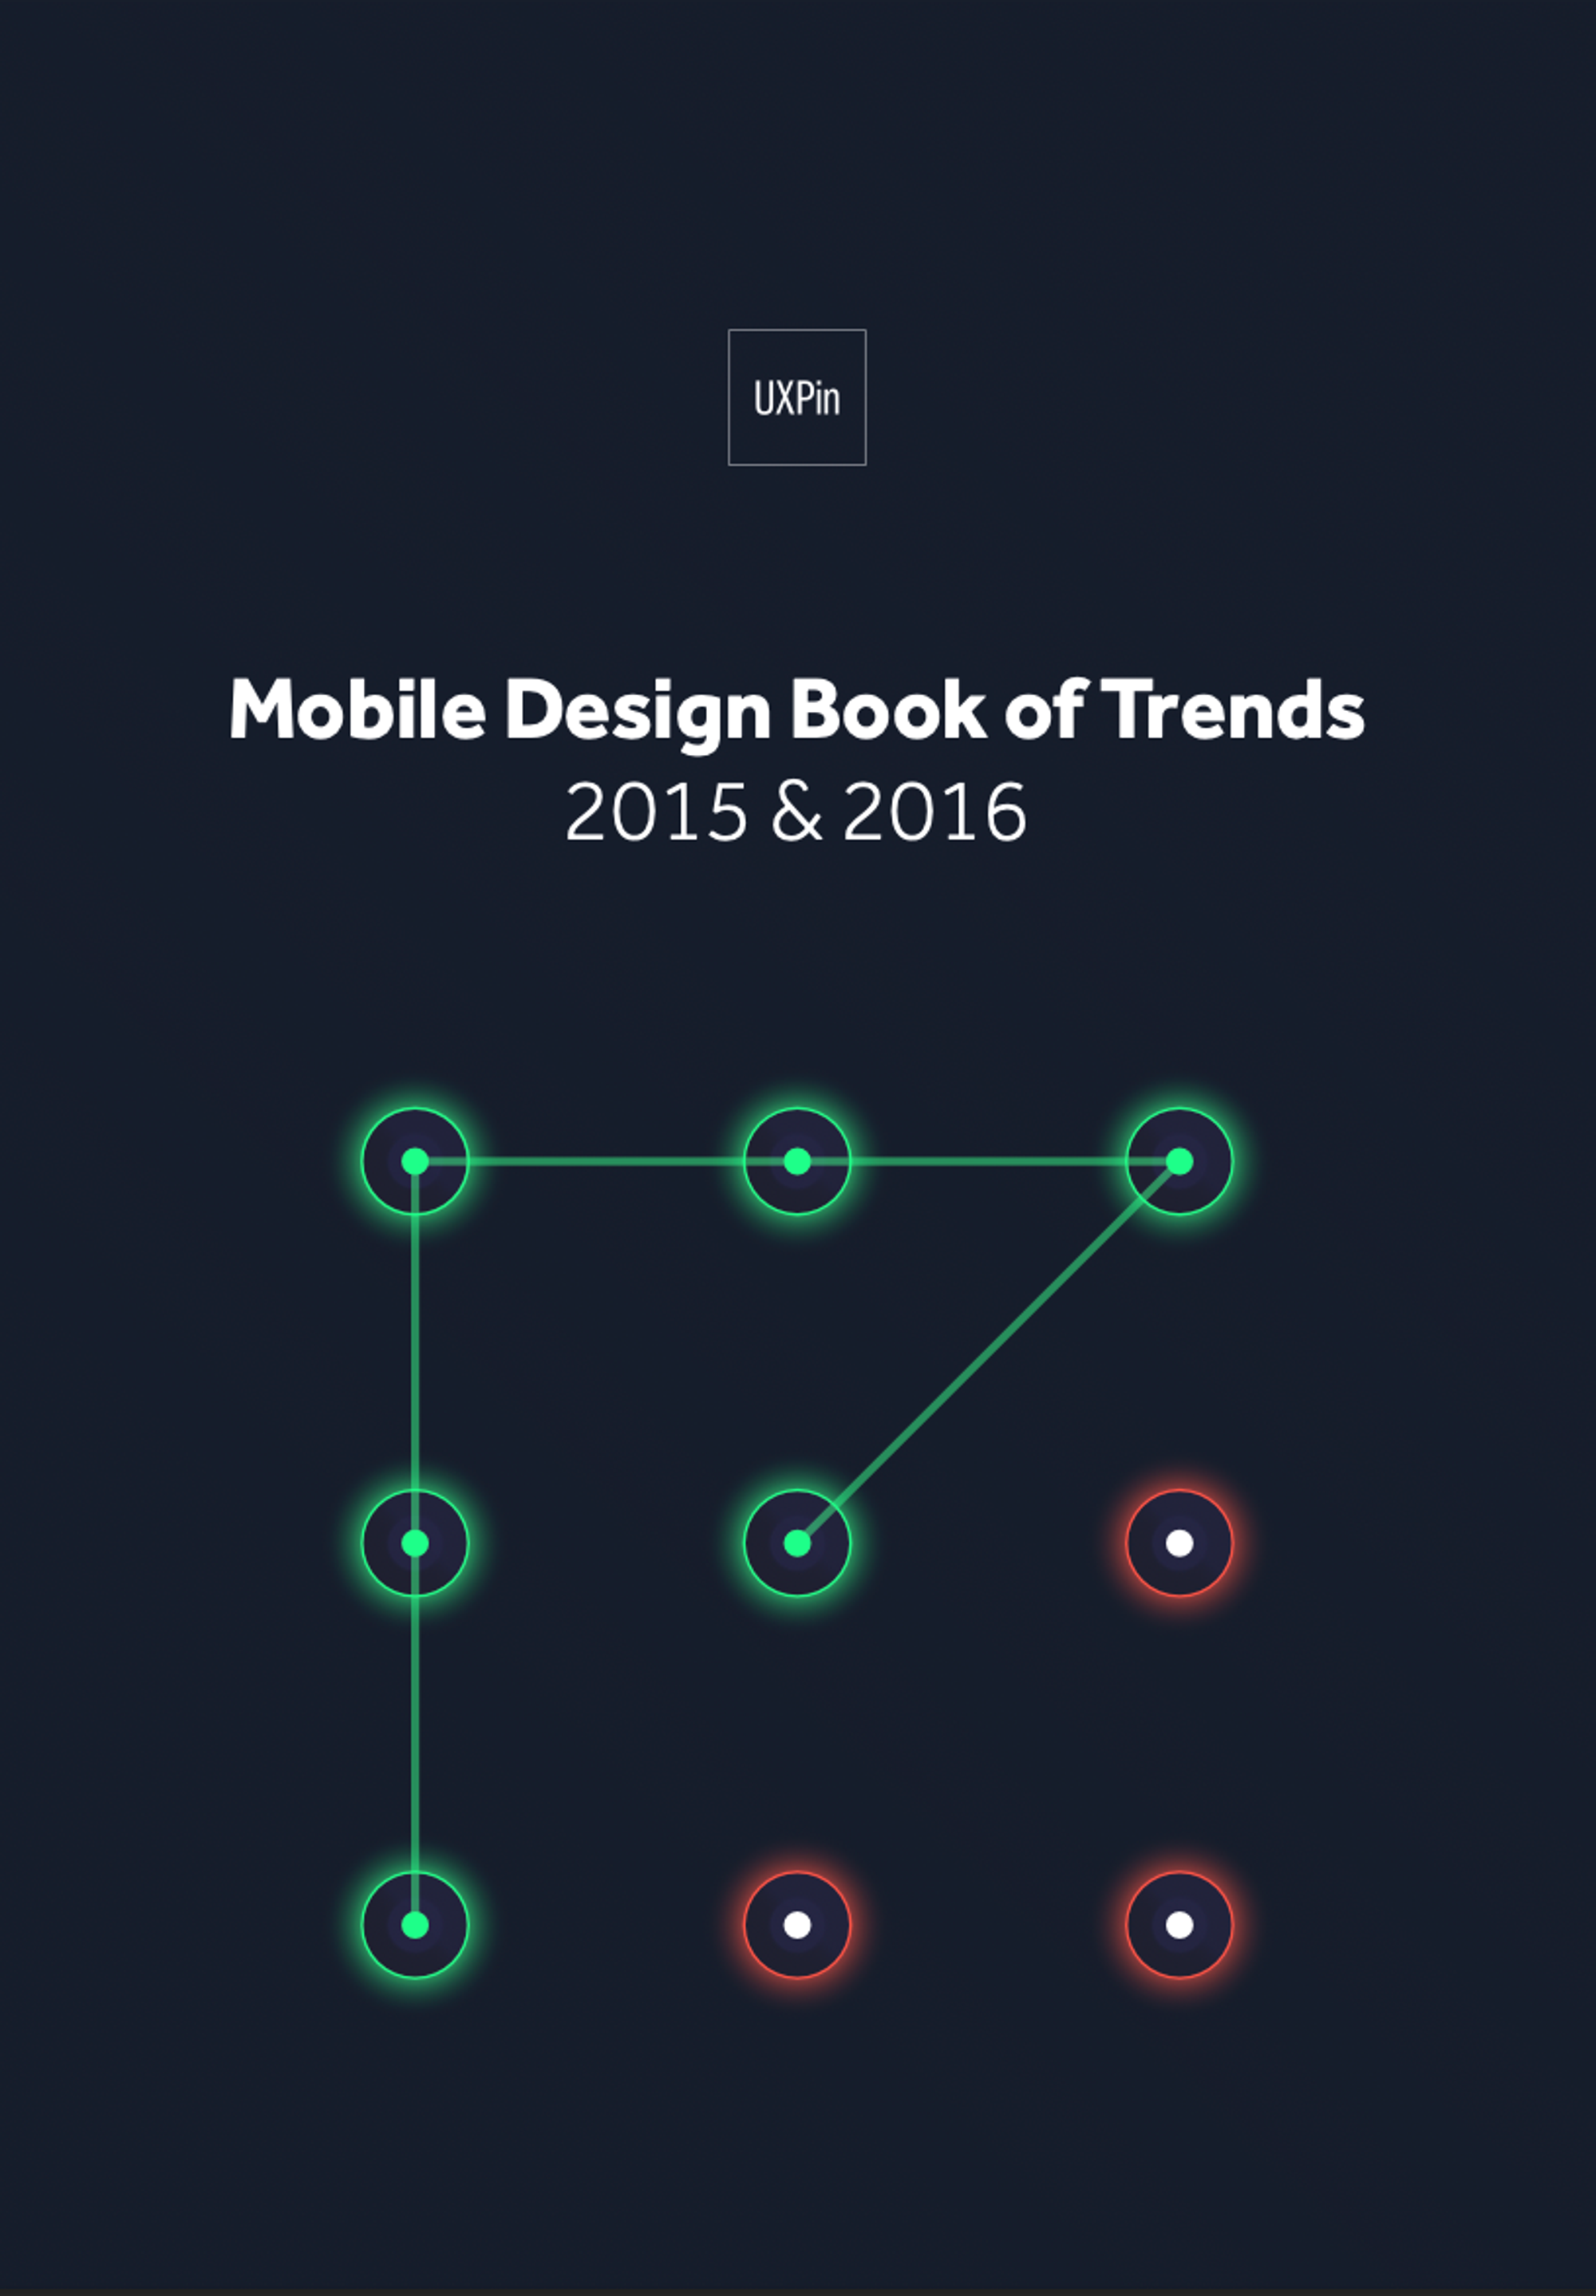 Mobile Design Book of Trends 2015 to 2016